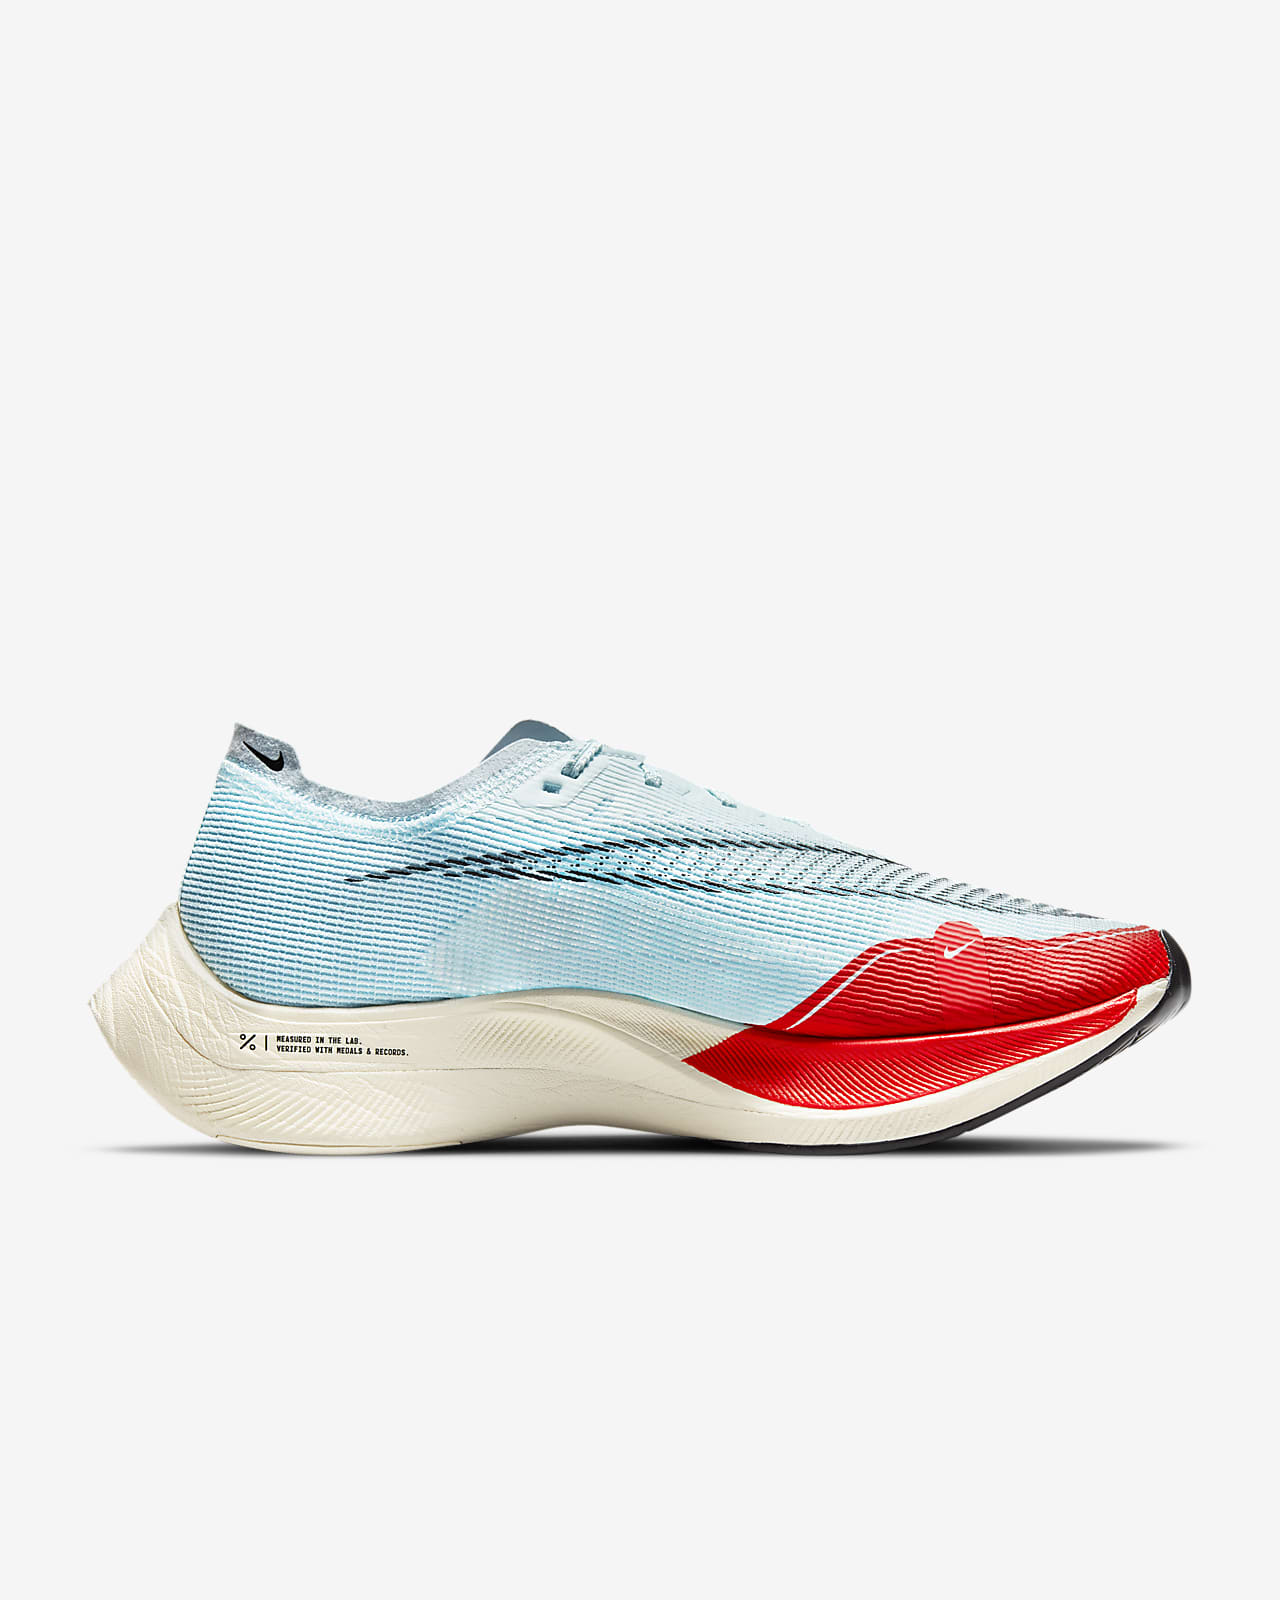 zoomx vaporfly next for sale uk